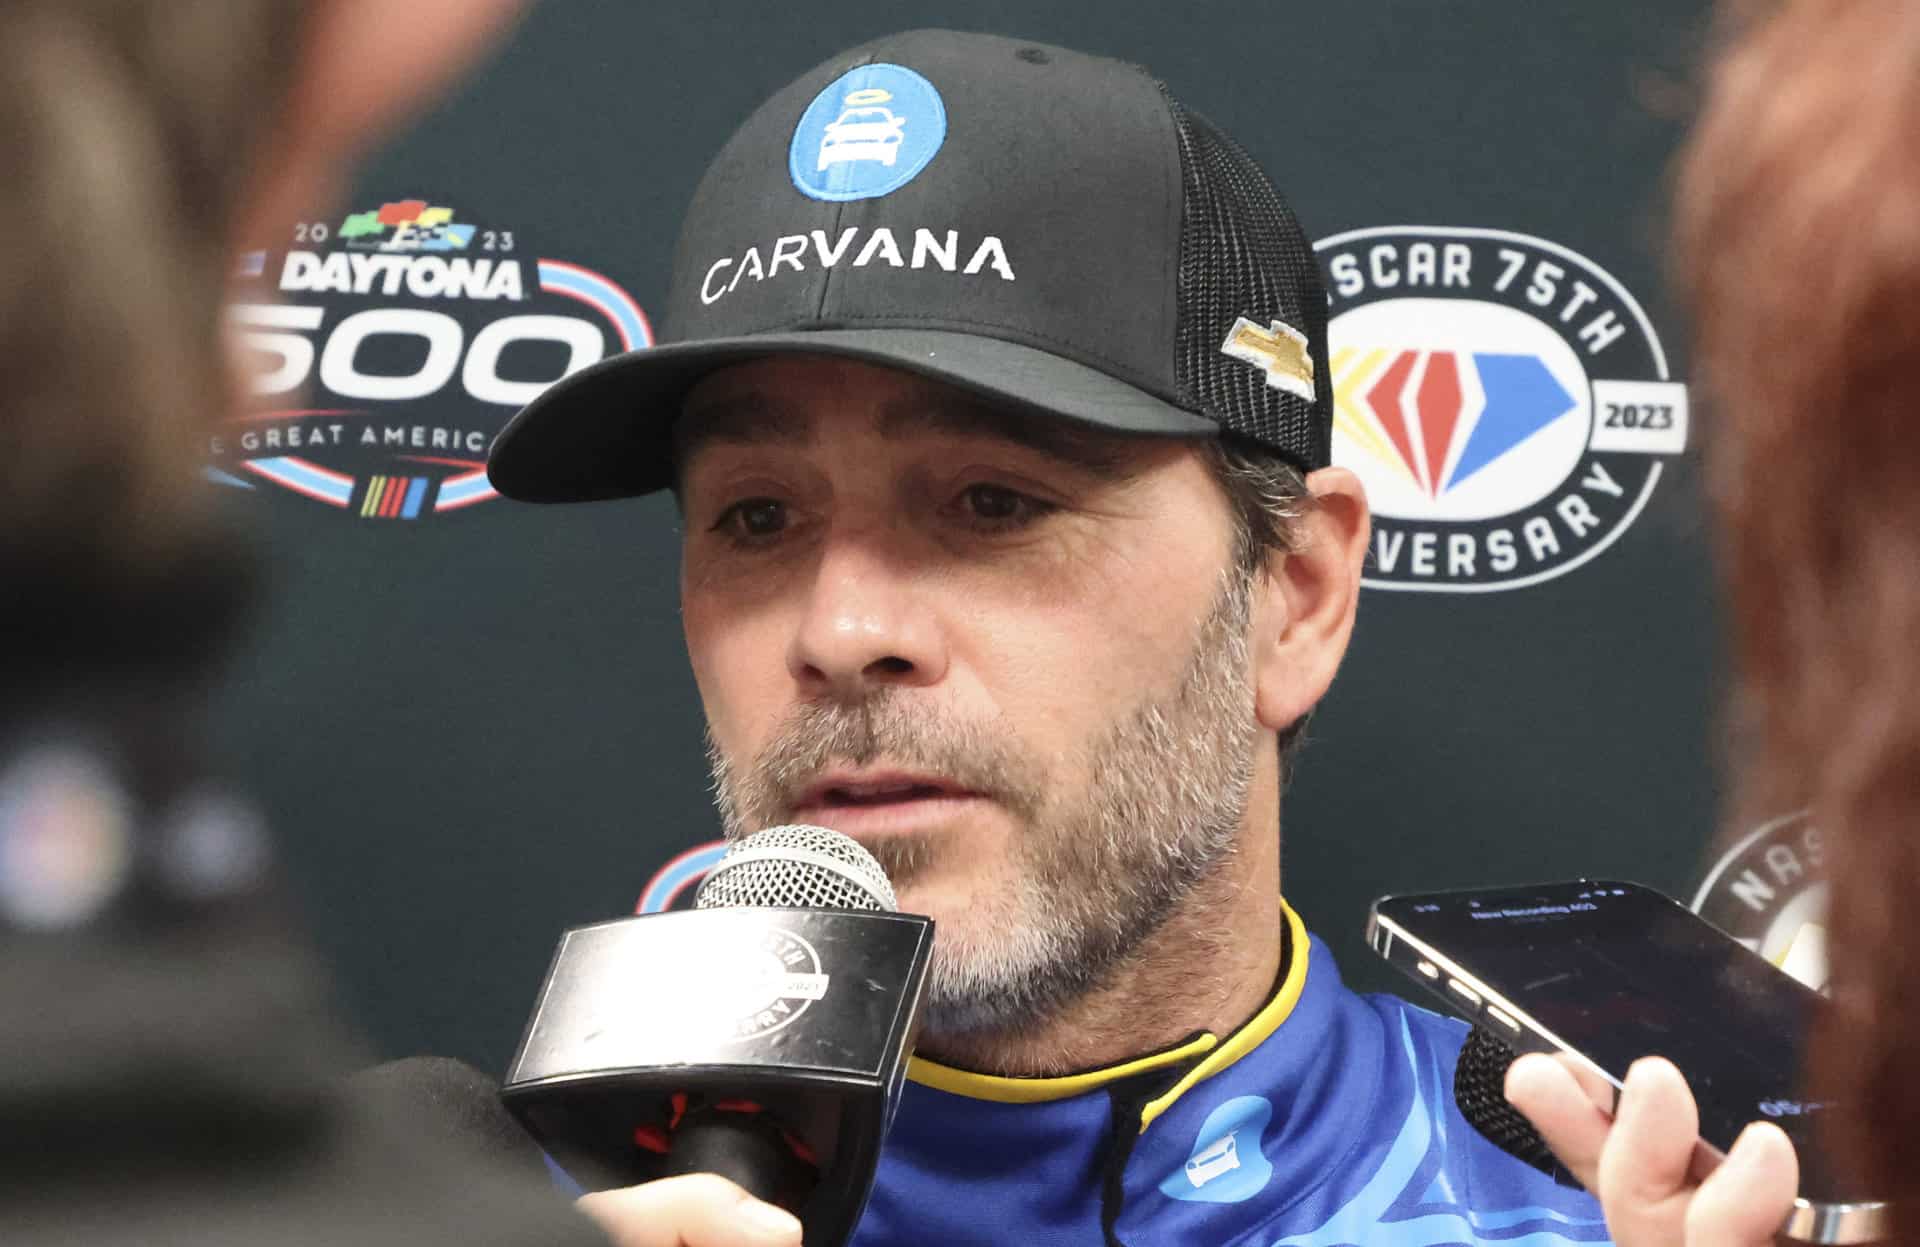 Jimmie Johnson fields questions during Daytona 500 Media Day. Photo by Jerry Jordan/Kickin' the Tires